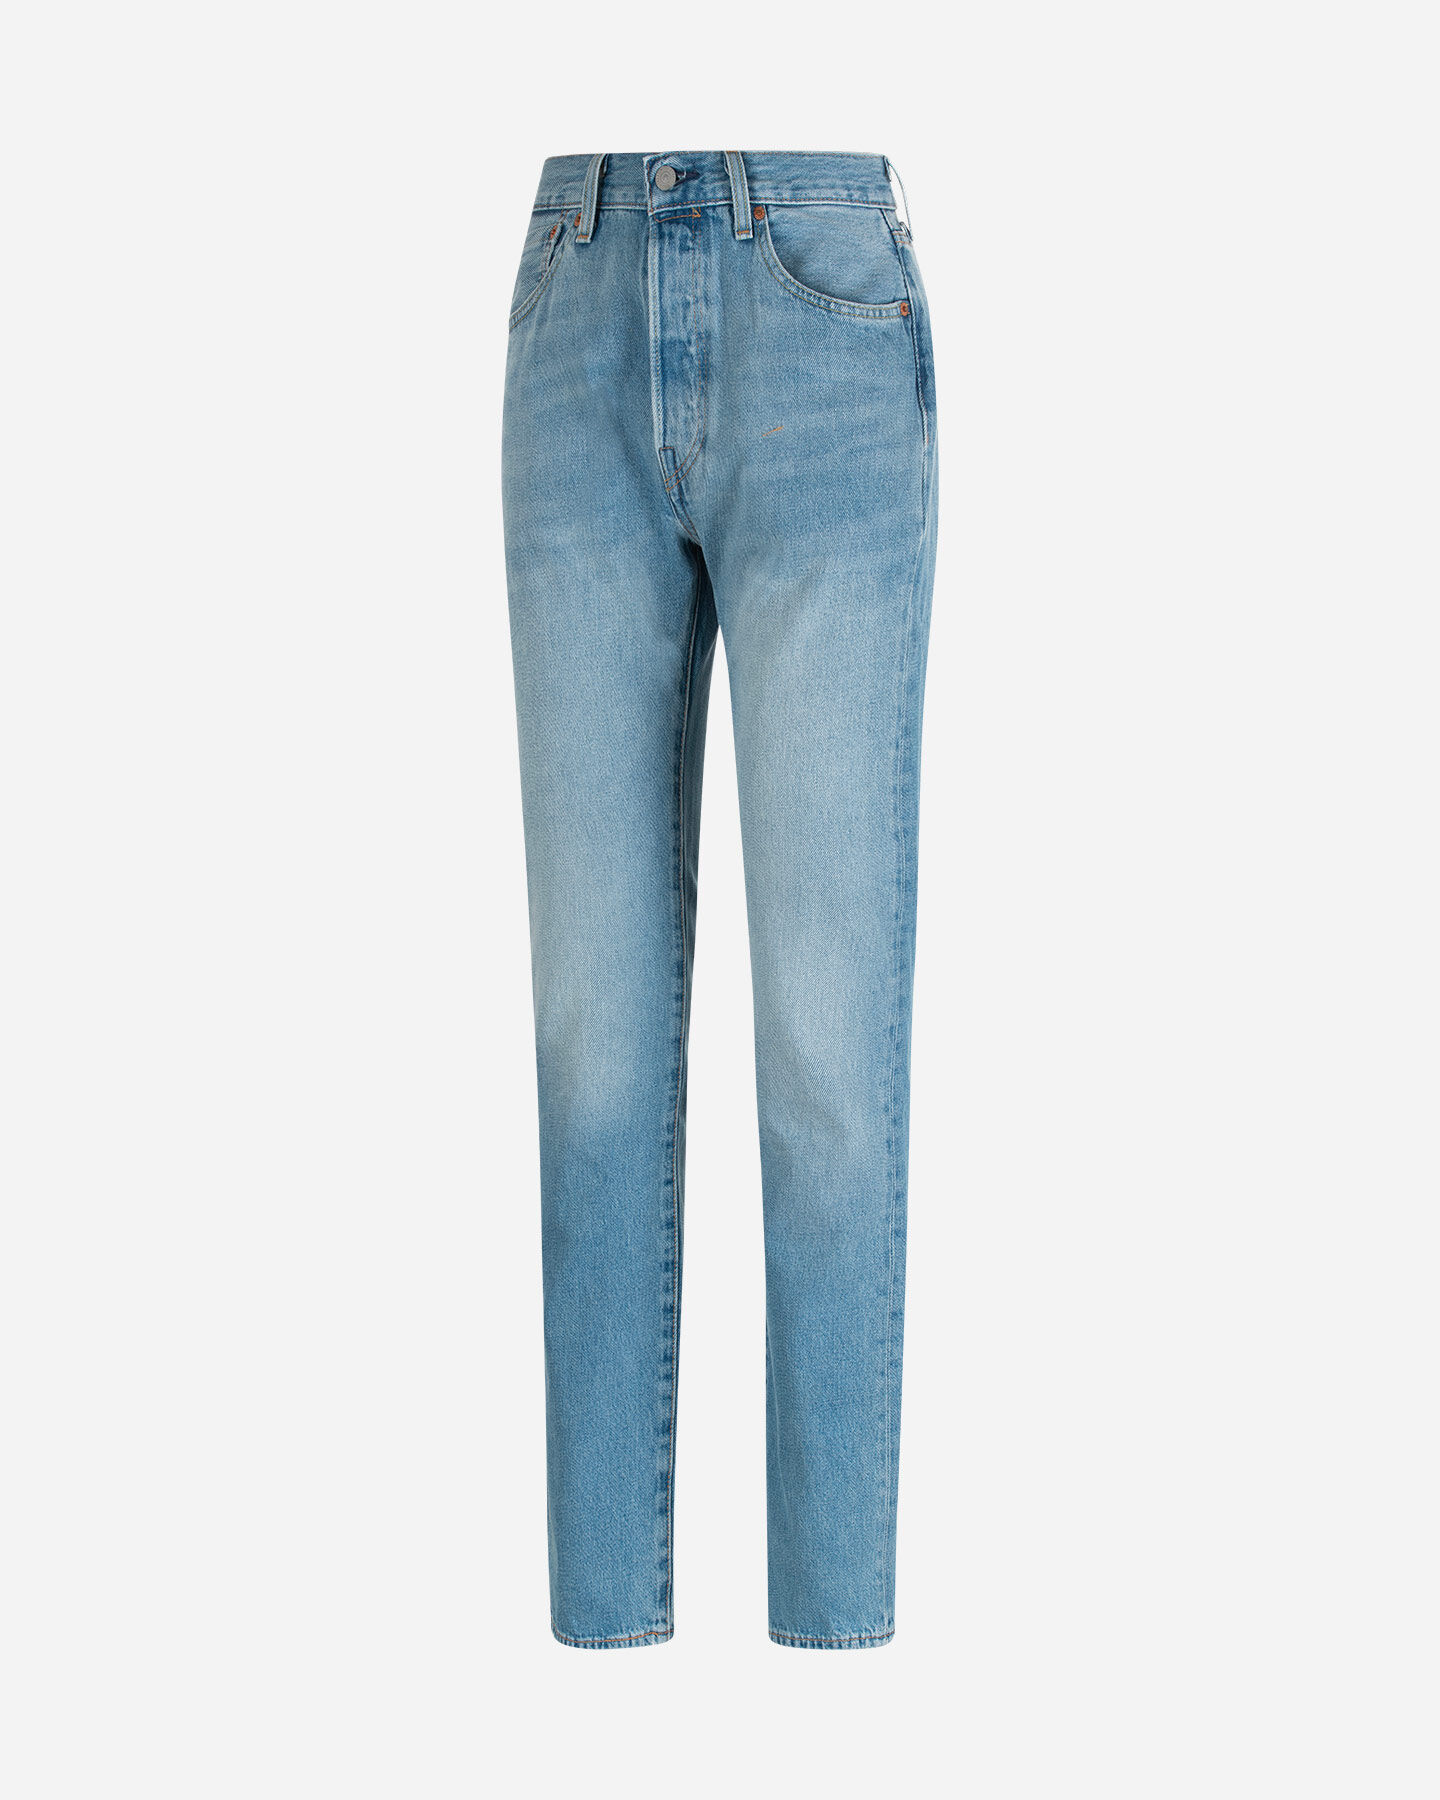  Jeans LEVI'S 501 REGULAR M S4122296|3261|32 scatto 0